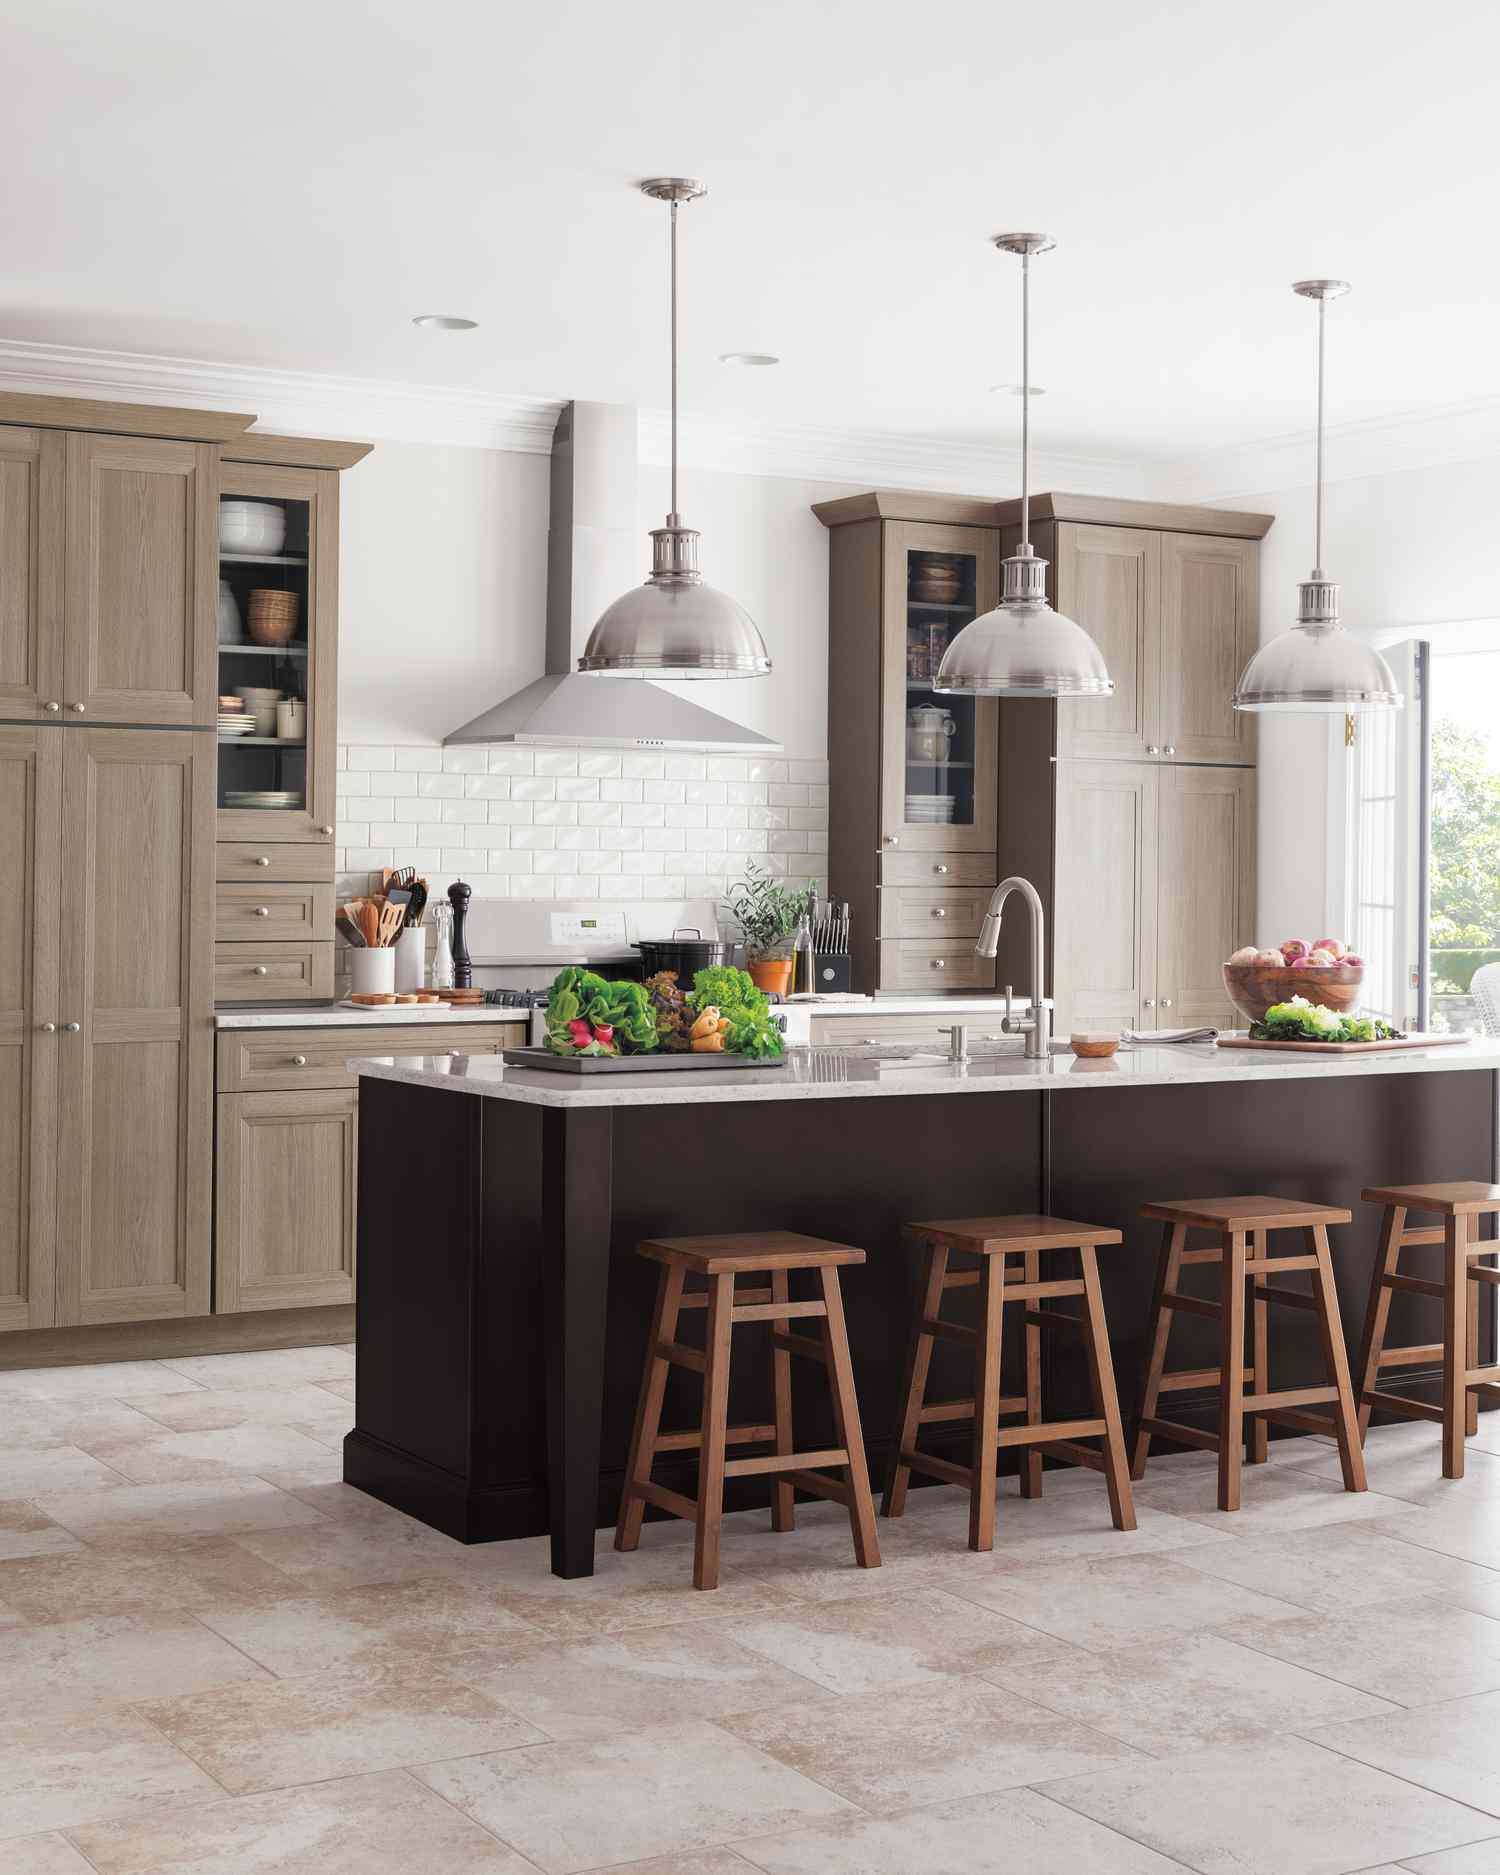 Peek Inside Martha's Kitchens and Steal the Looks for Your Home ...